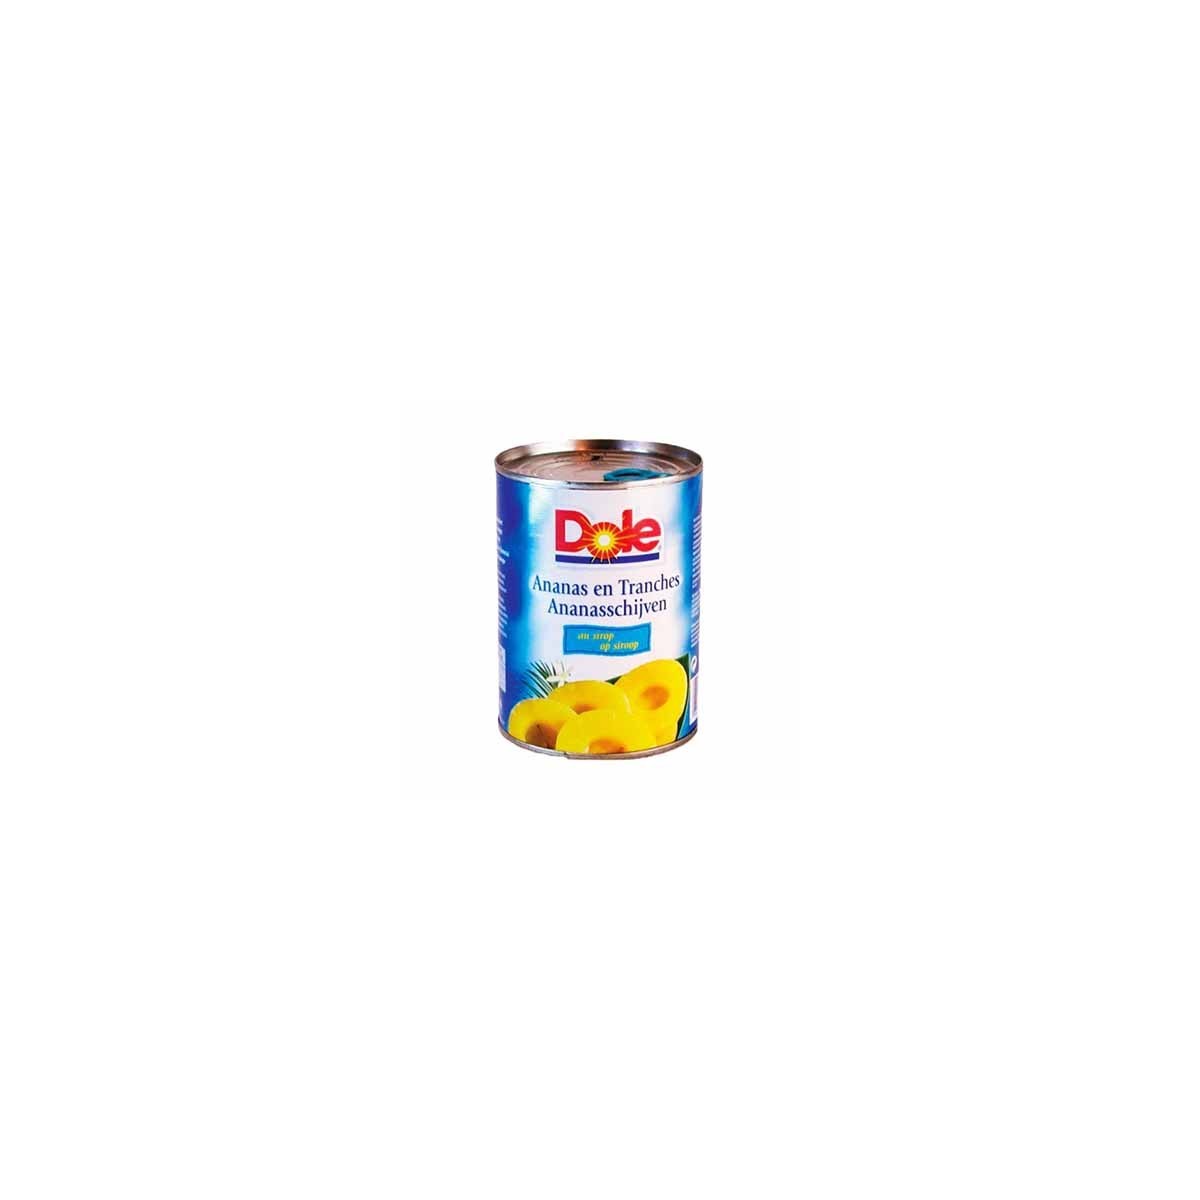 PINEAPPLE 10 SLICES TROPICAL GOLD DOLE 6 X 567GR  BOX